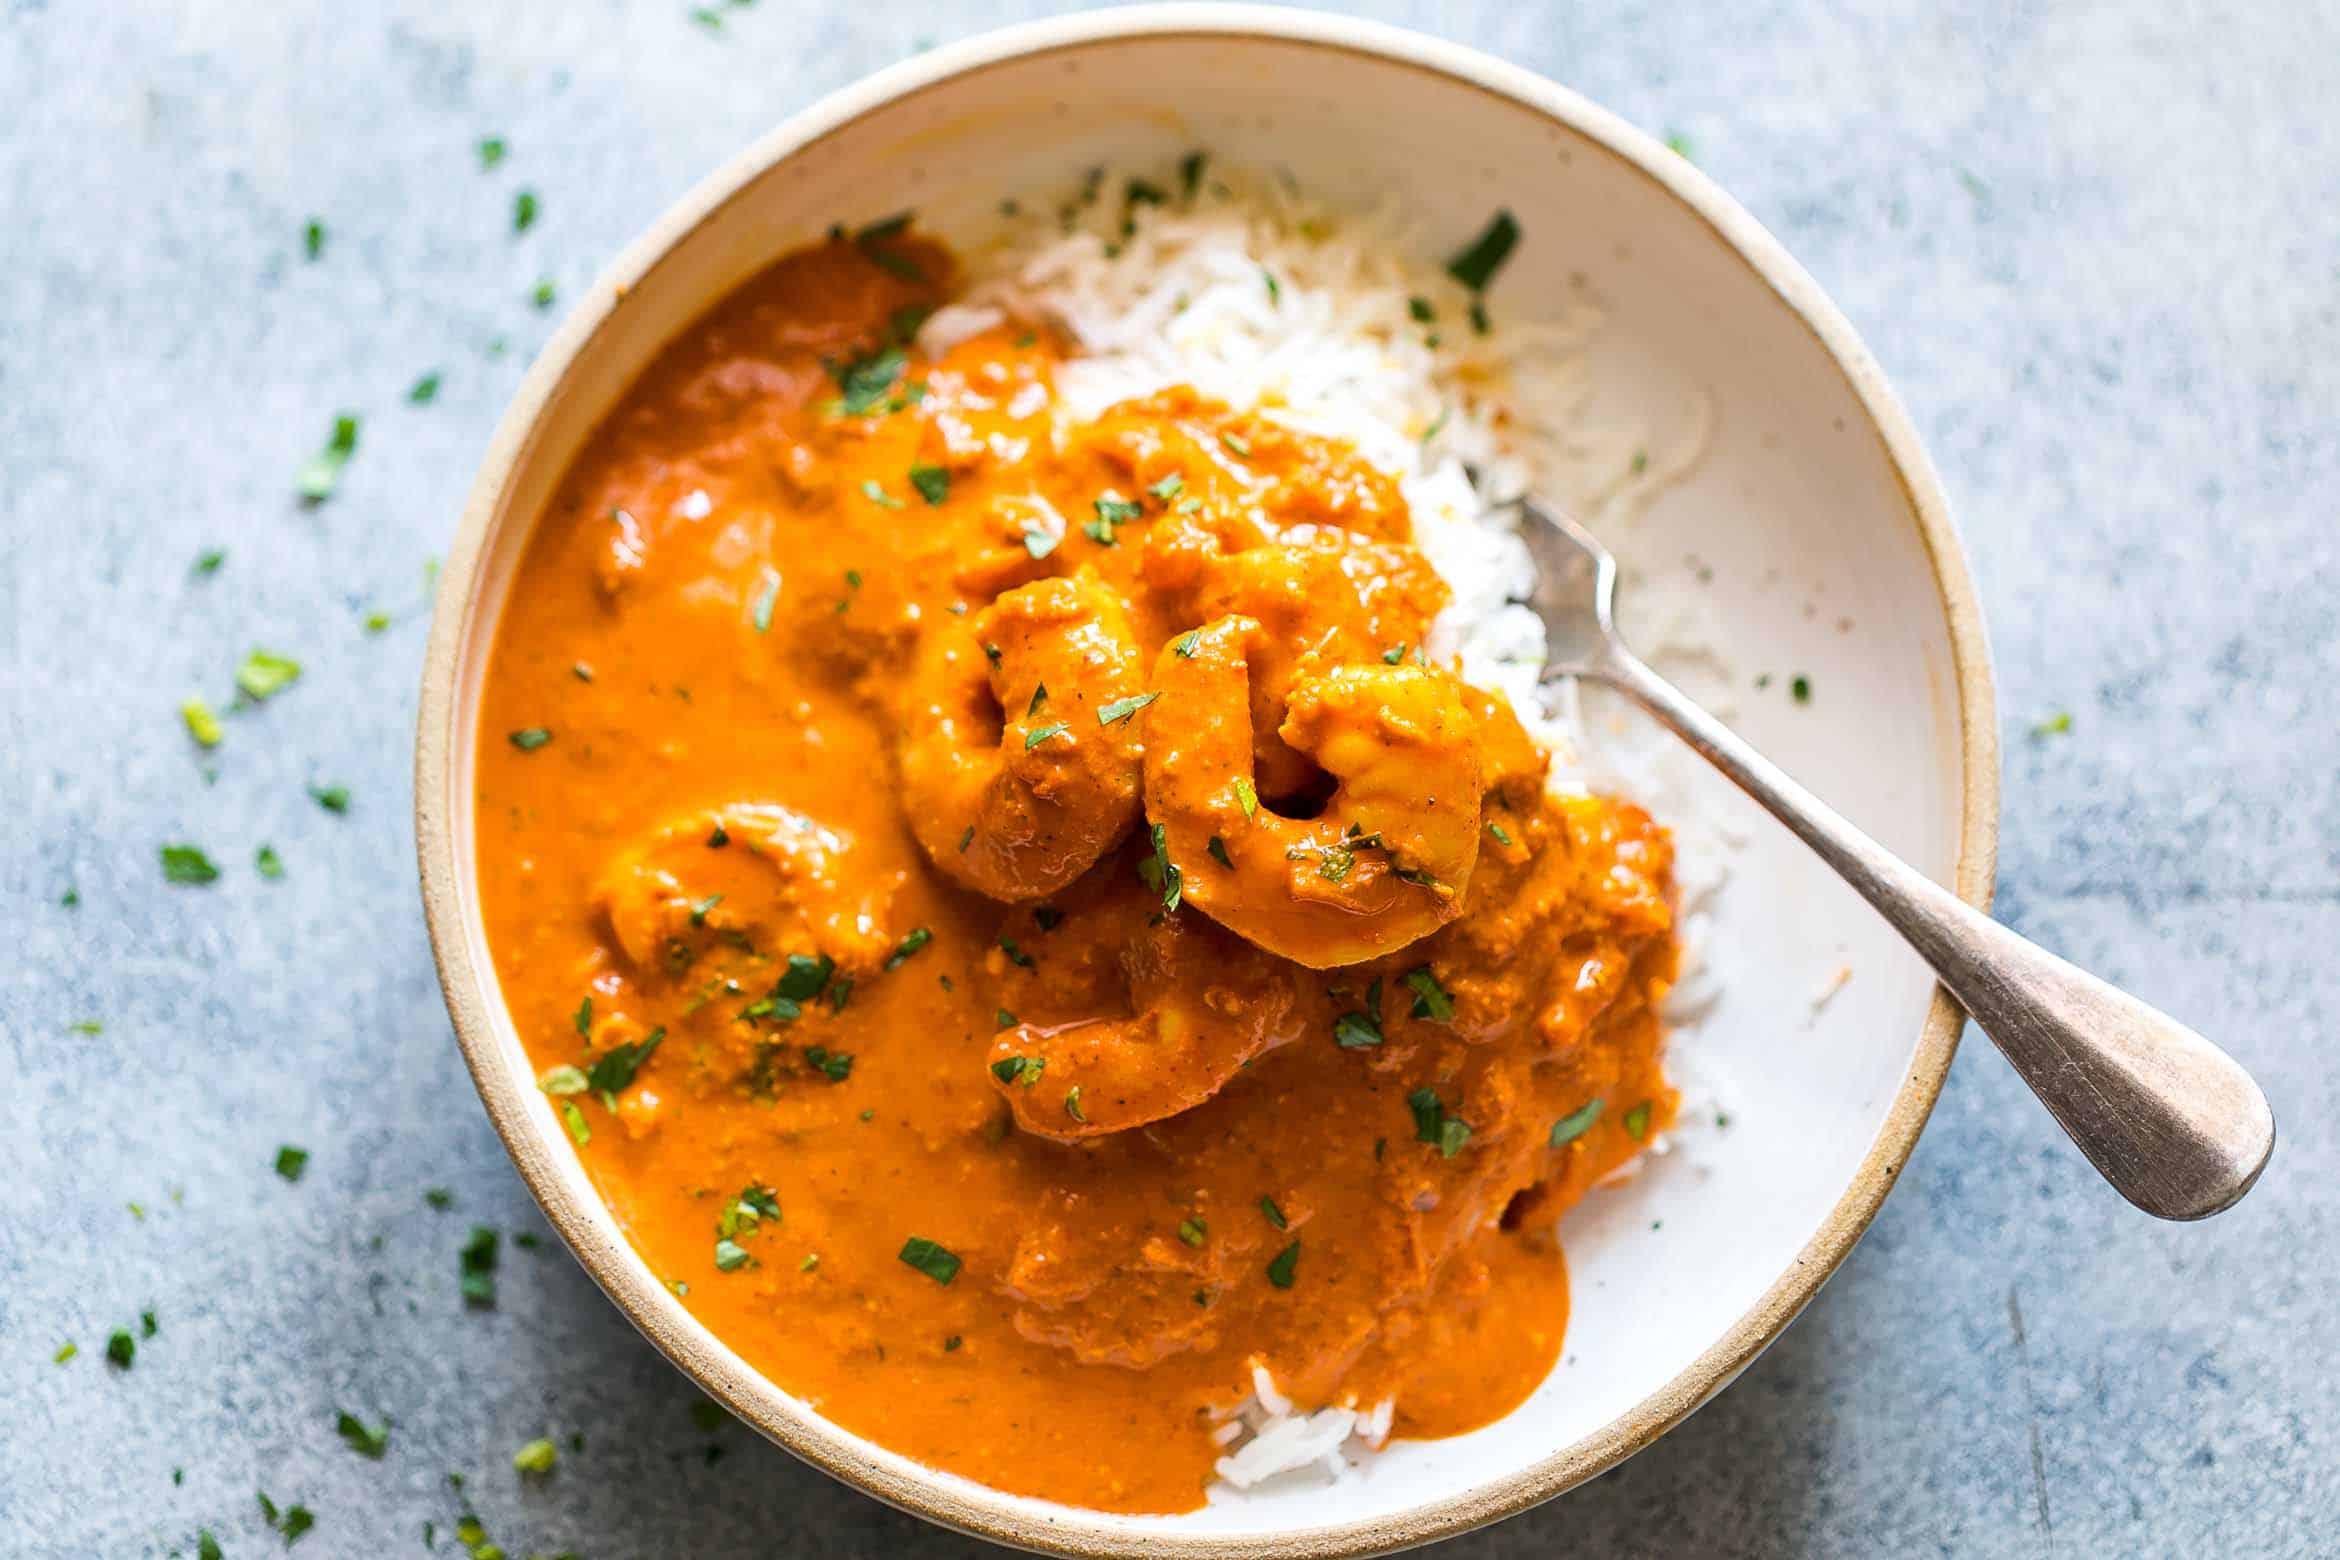 Goan Prawn Curry with Coconut is a spicy, sour curry that comes from Goa and is also called Ambot Tik. Just serve this with steamed rice and you have a truly satisfying meal!